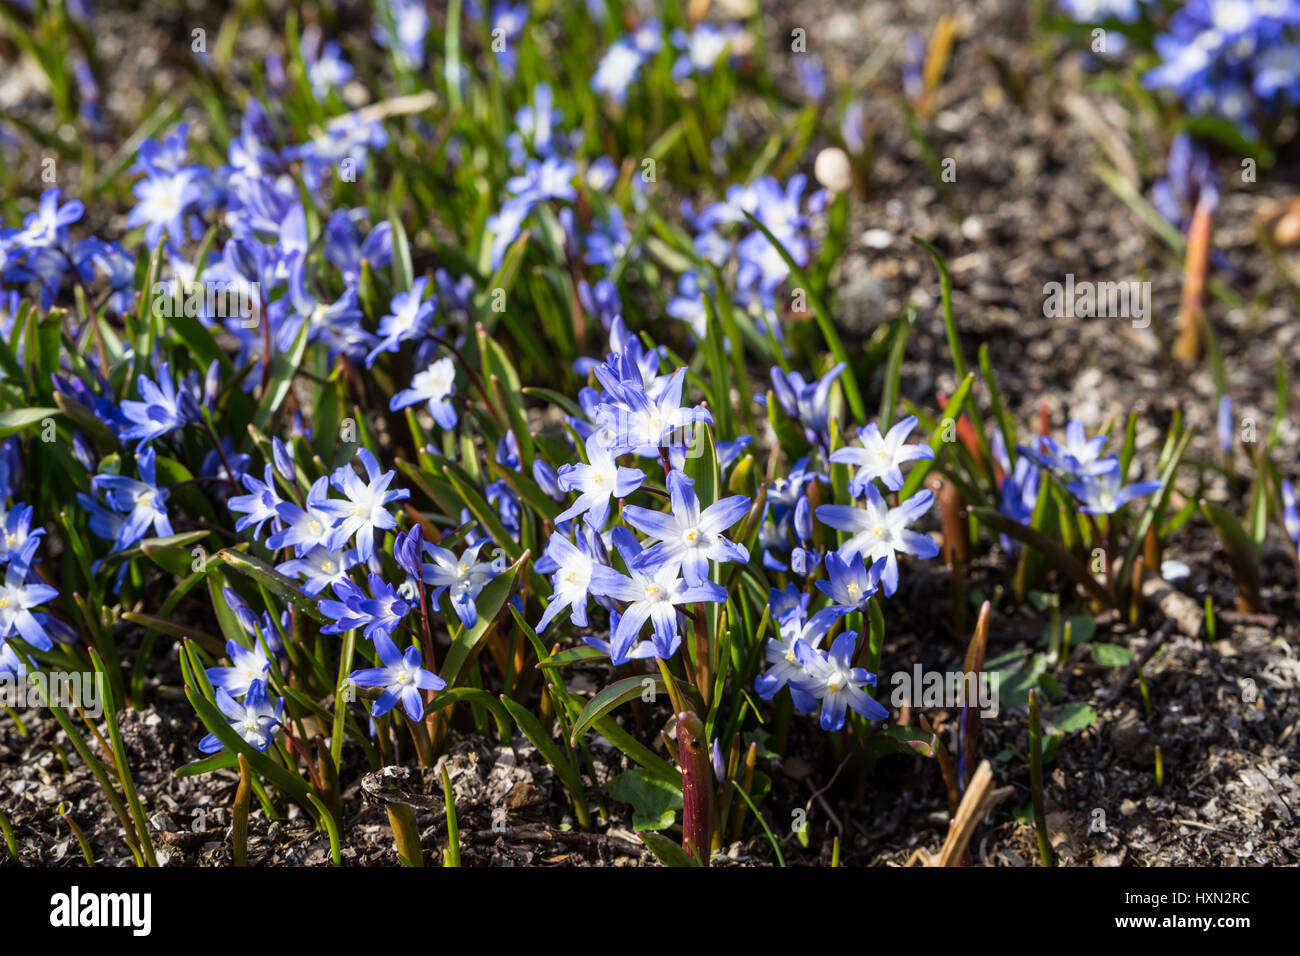 Glory of the snow. Chionodoxa. One of the very earliest signs of spring is when the glory of the snow emerges with its magnificent blue star-shaped pe Stock Photo